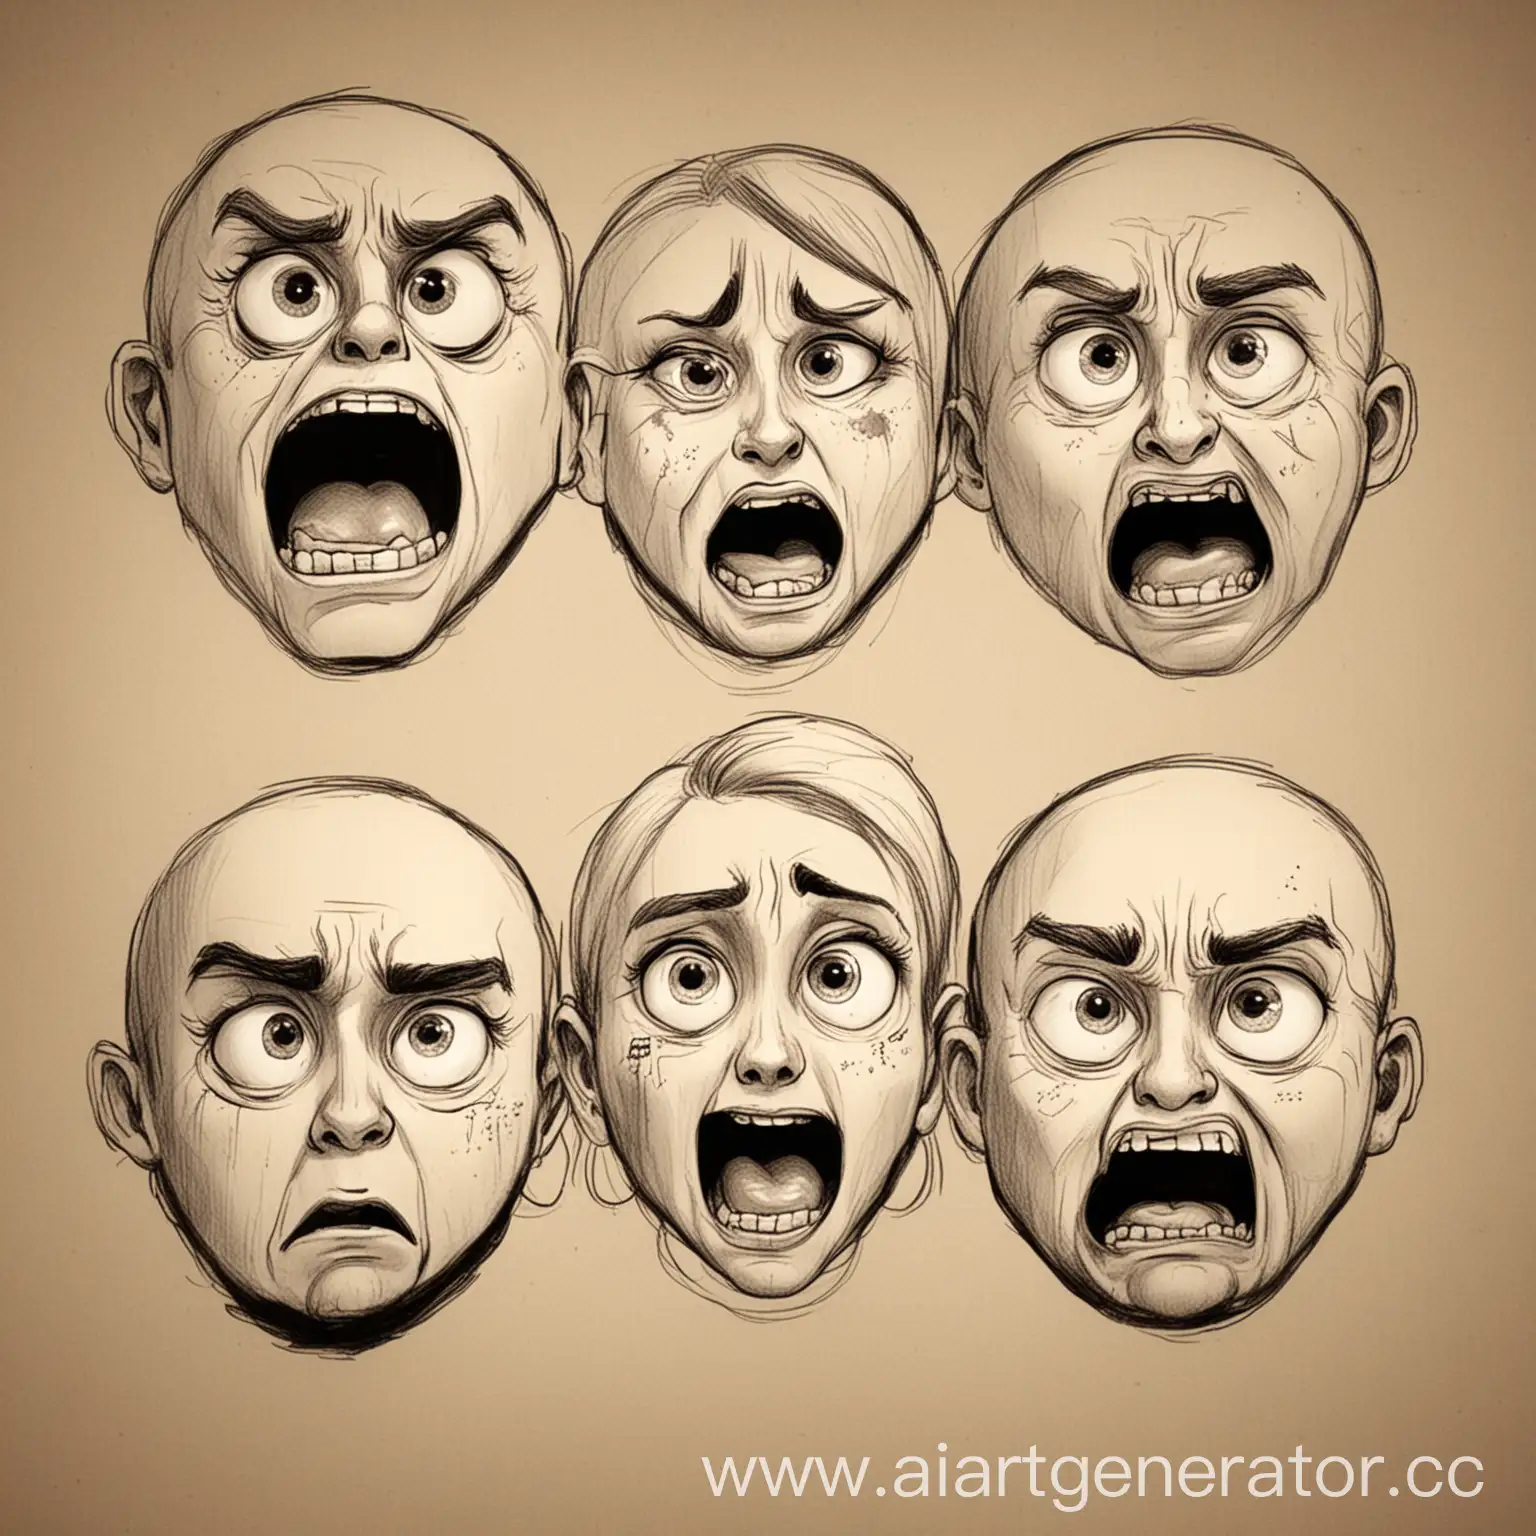 Expressive-Faces-Illustration-Portraying-Pleasure-Anger-Surprise-and-Fright